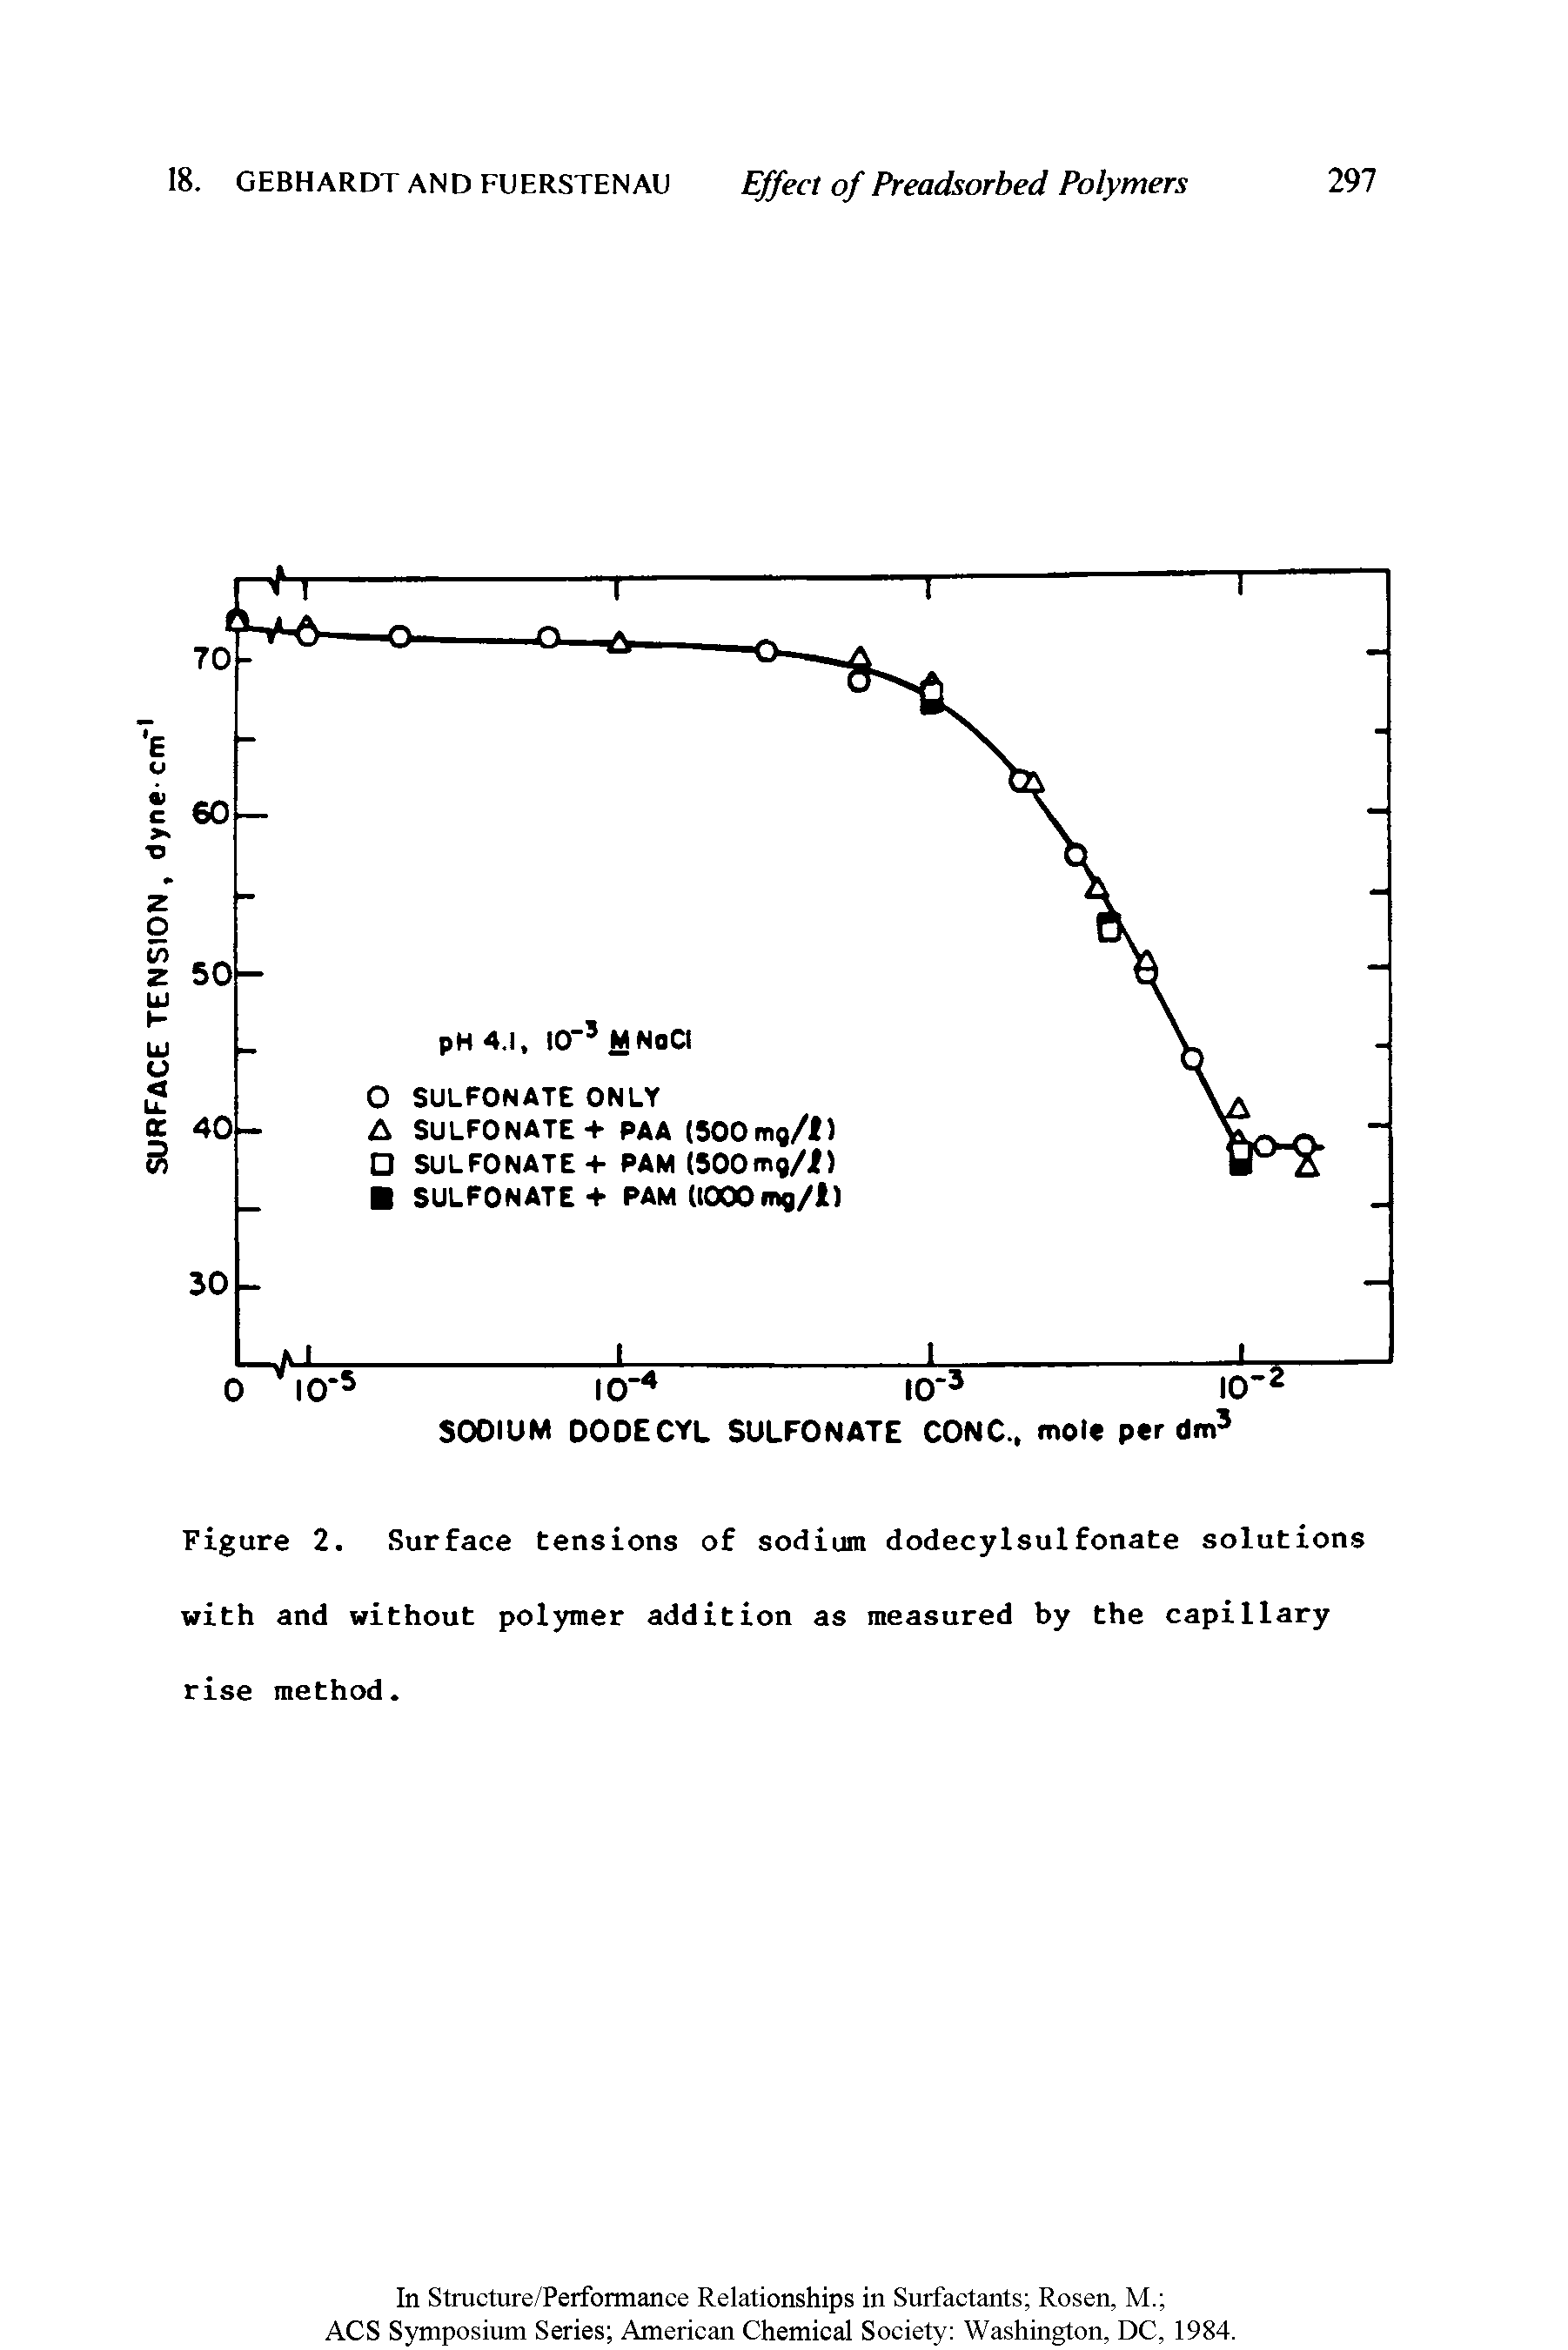 Figure 2. Surface tensions of sodium dodecylsulfonate solutions with and without polymer addition as measured by the capillary rise method.